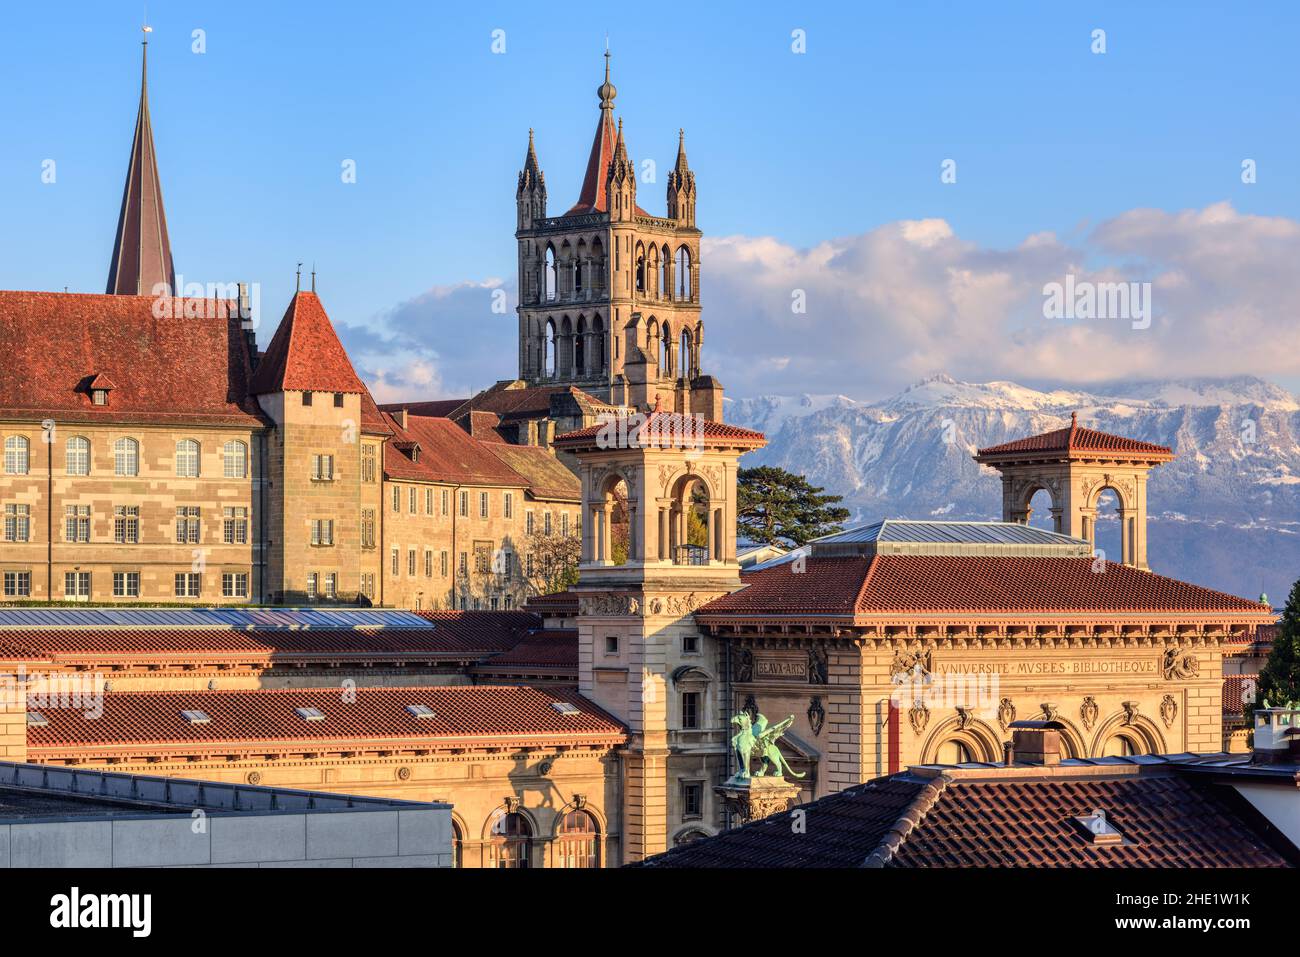 Lausanne city, view of the gothic Cathedral, Rumine palace museum (with inscripts Arts, University, Museum, Library) and the snow covered Alps mountai Stock Photo